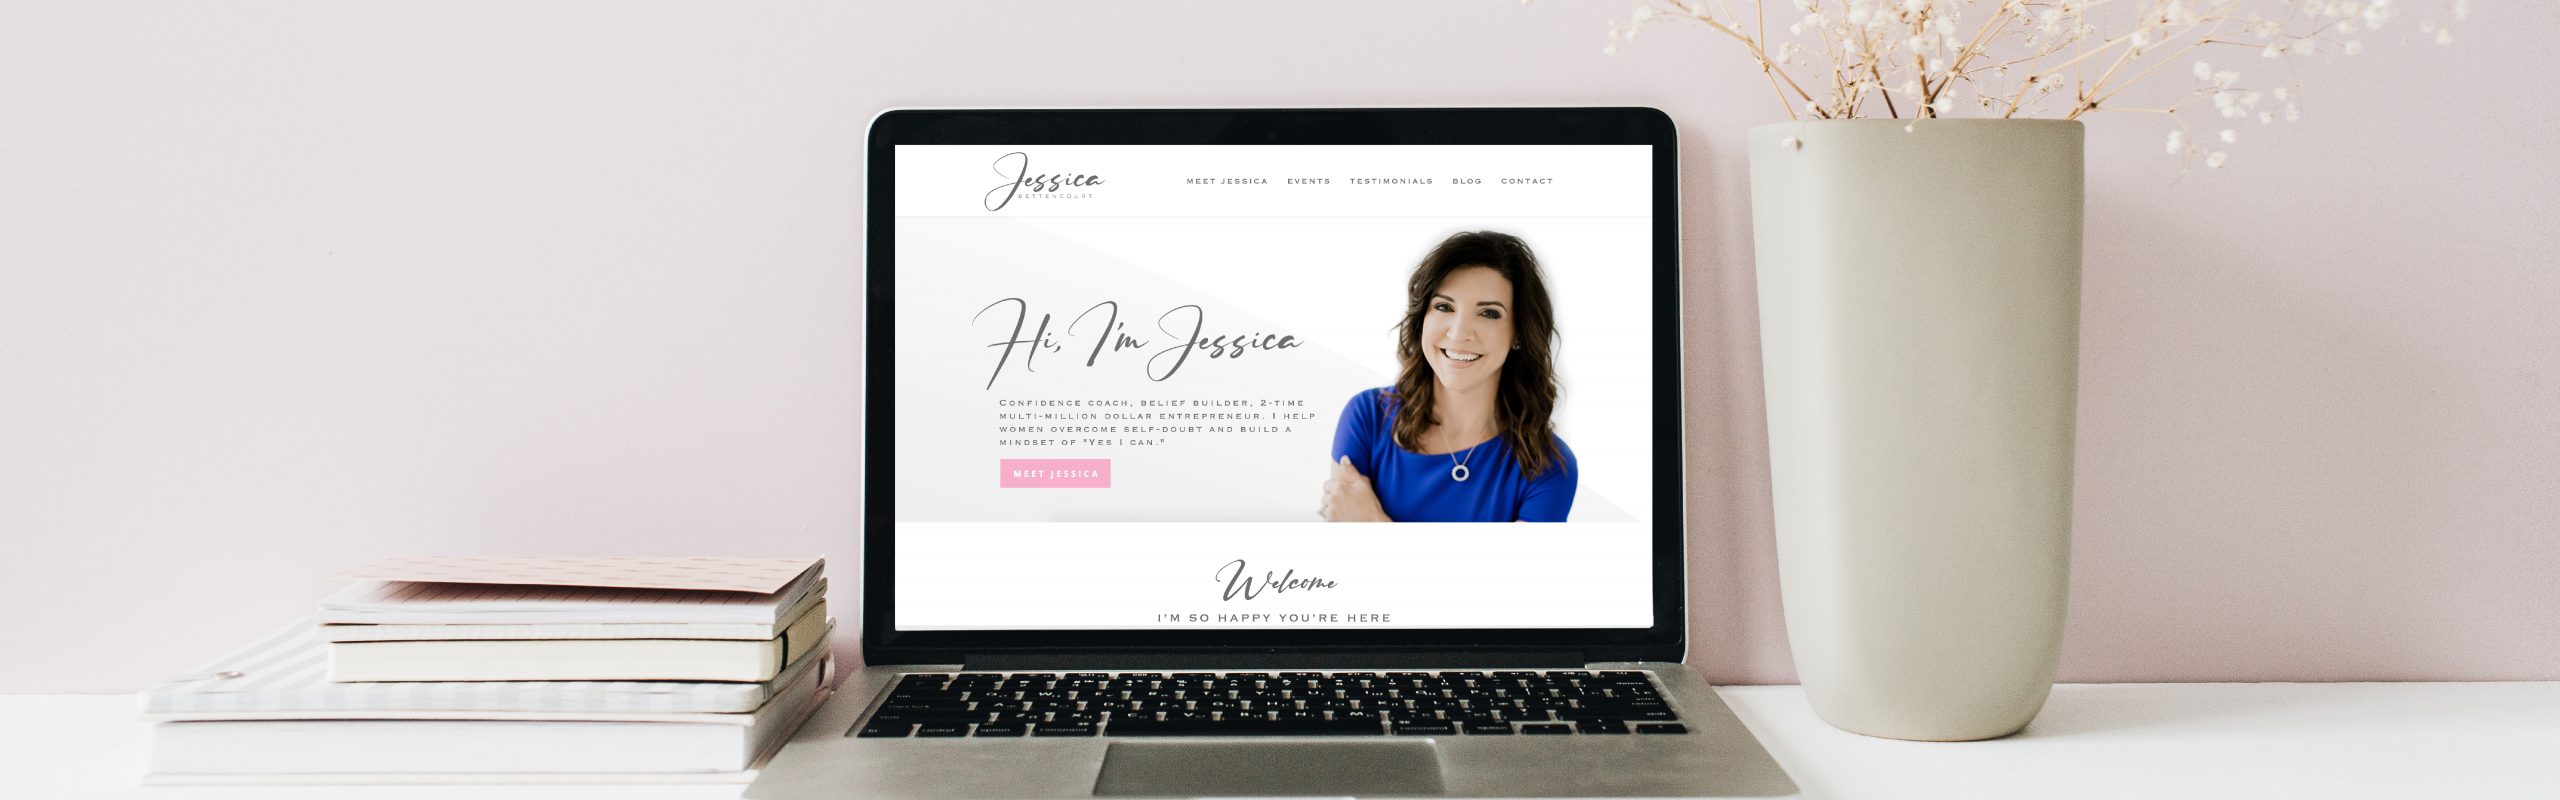 A laptop is open on a desk displaying Jessica Bettencourt's personal website with a photo of a smiling woman, accompanied by decorative elements such as a vase with branches and a stack of books, all